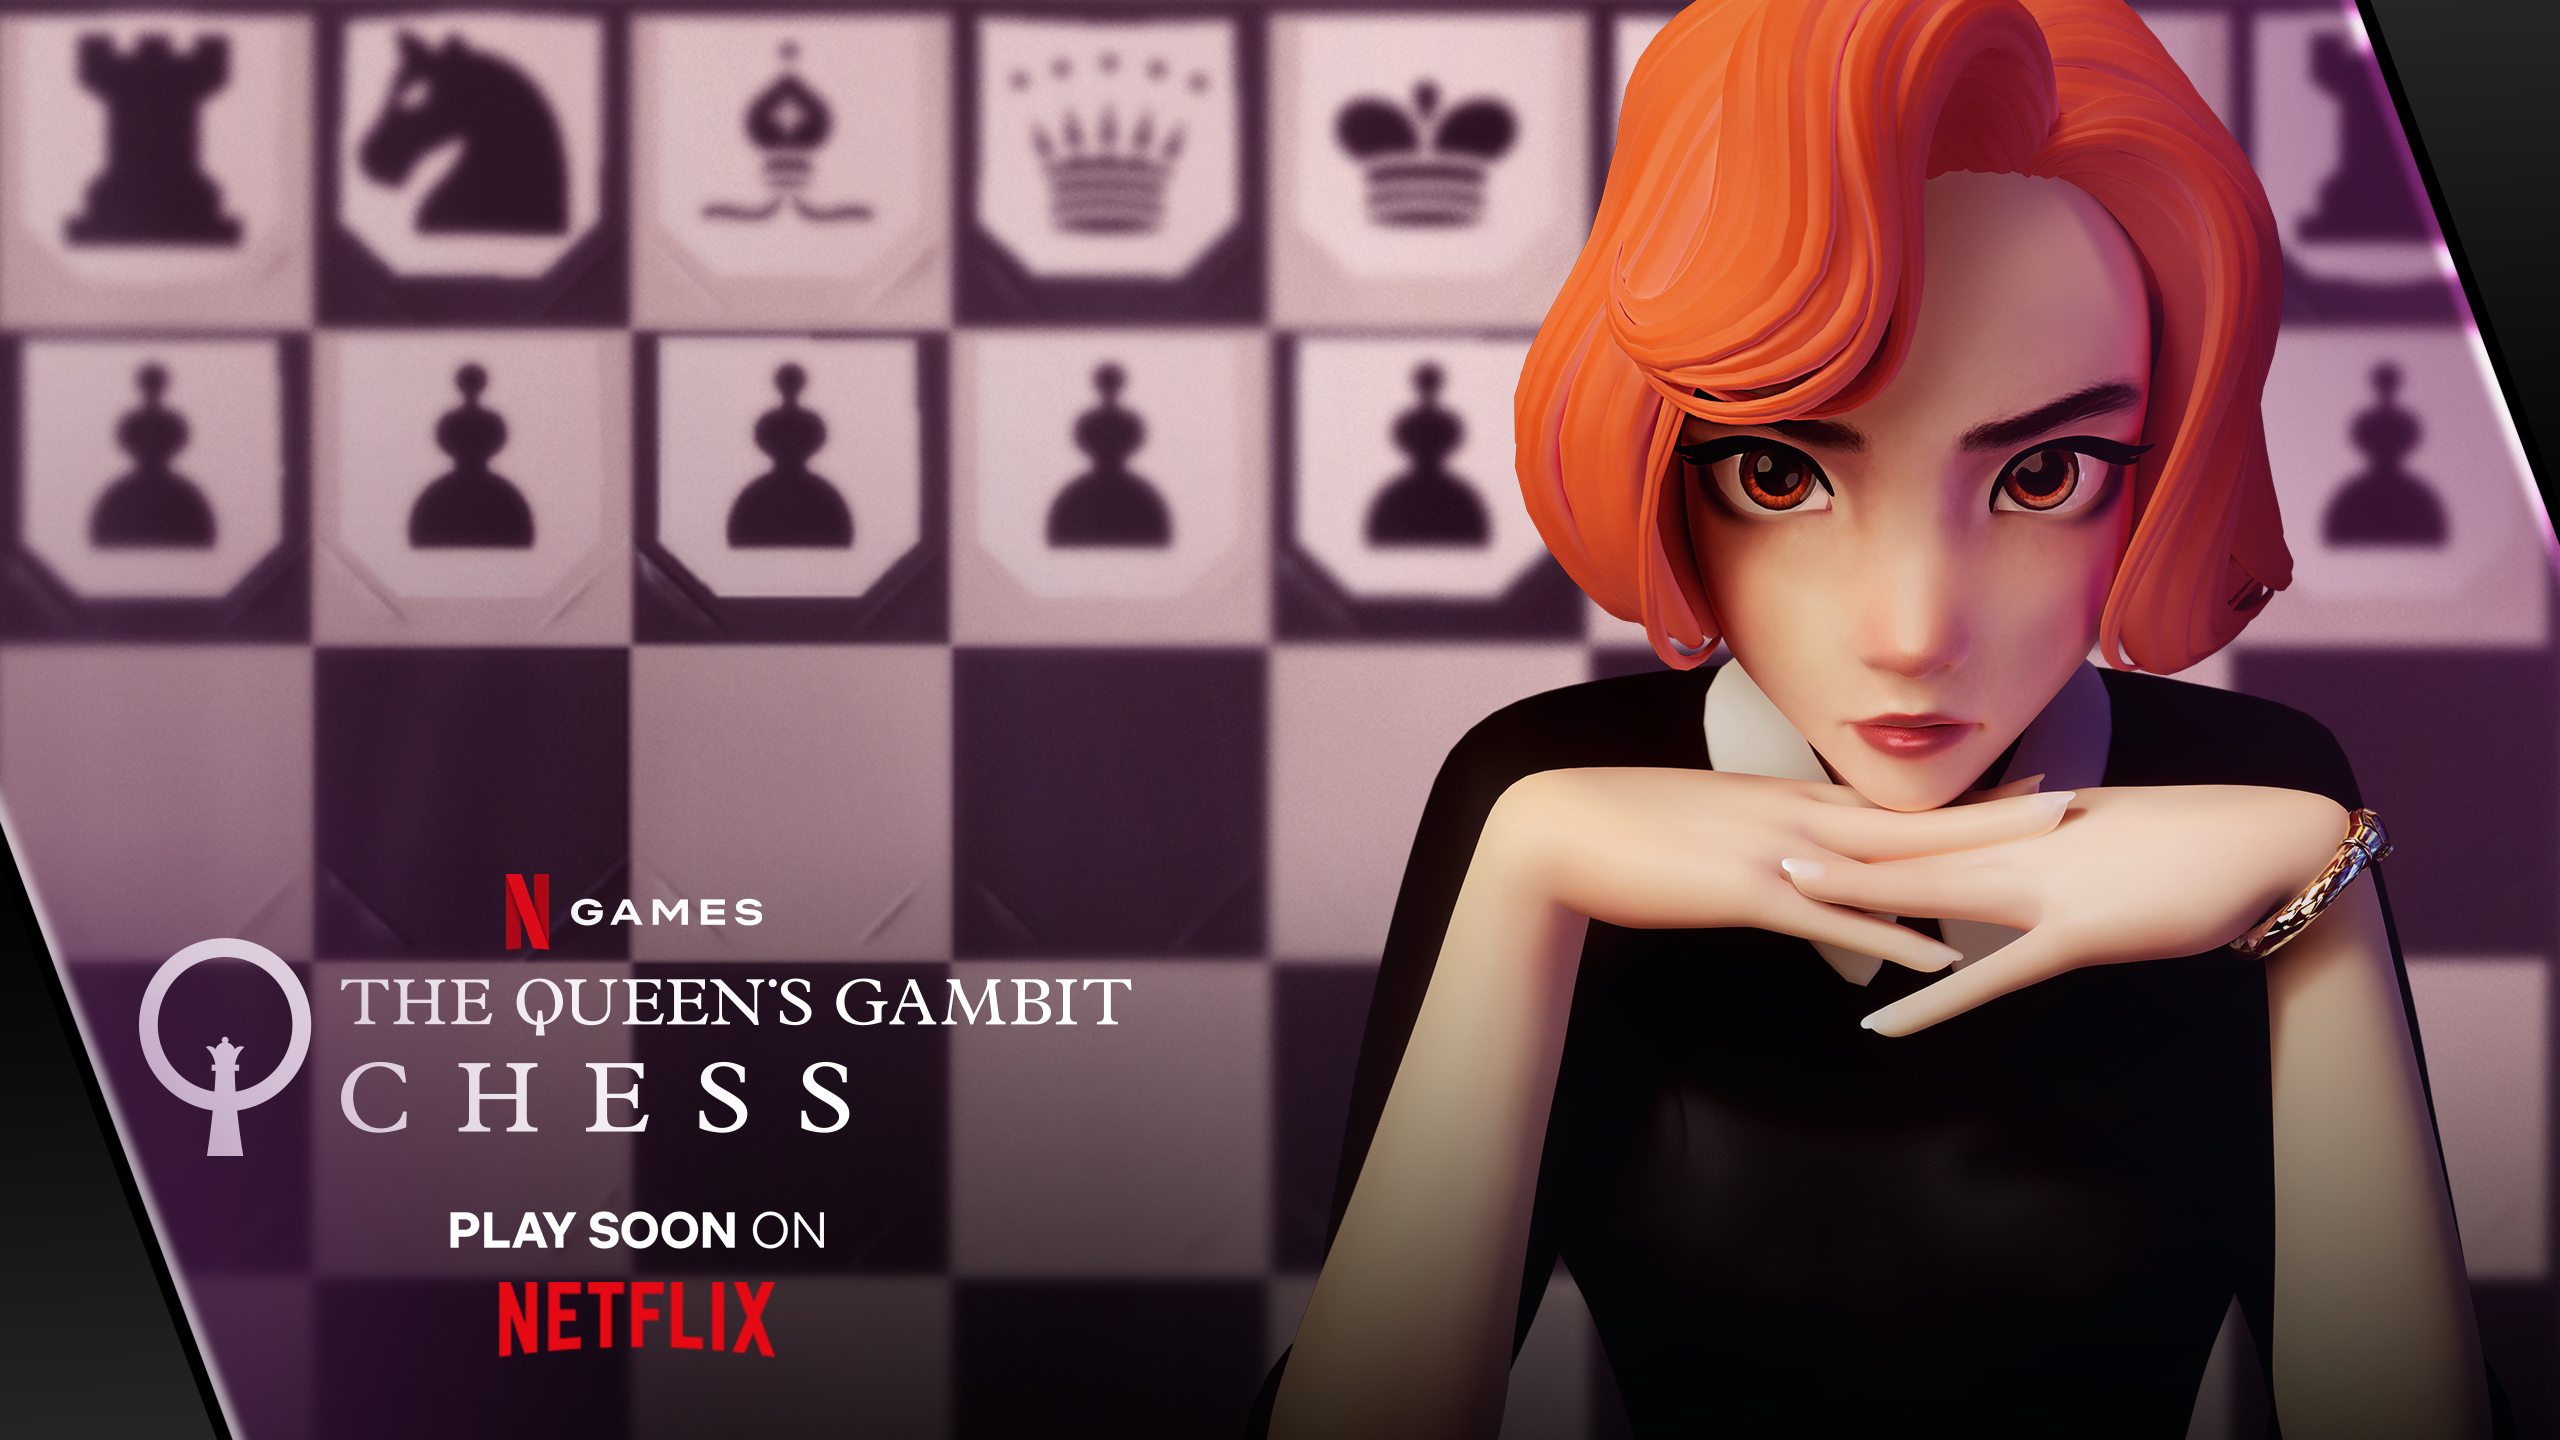 Netflix announces games tied to its popular shows, including 'The Queen's Gambit,' 'Shadow and Bone' and more | TechCrunch